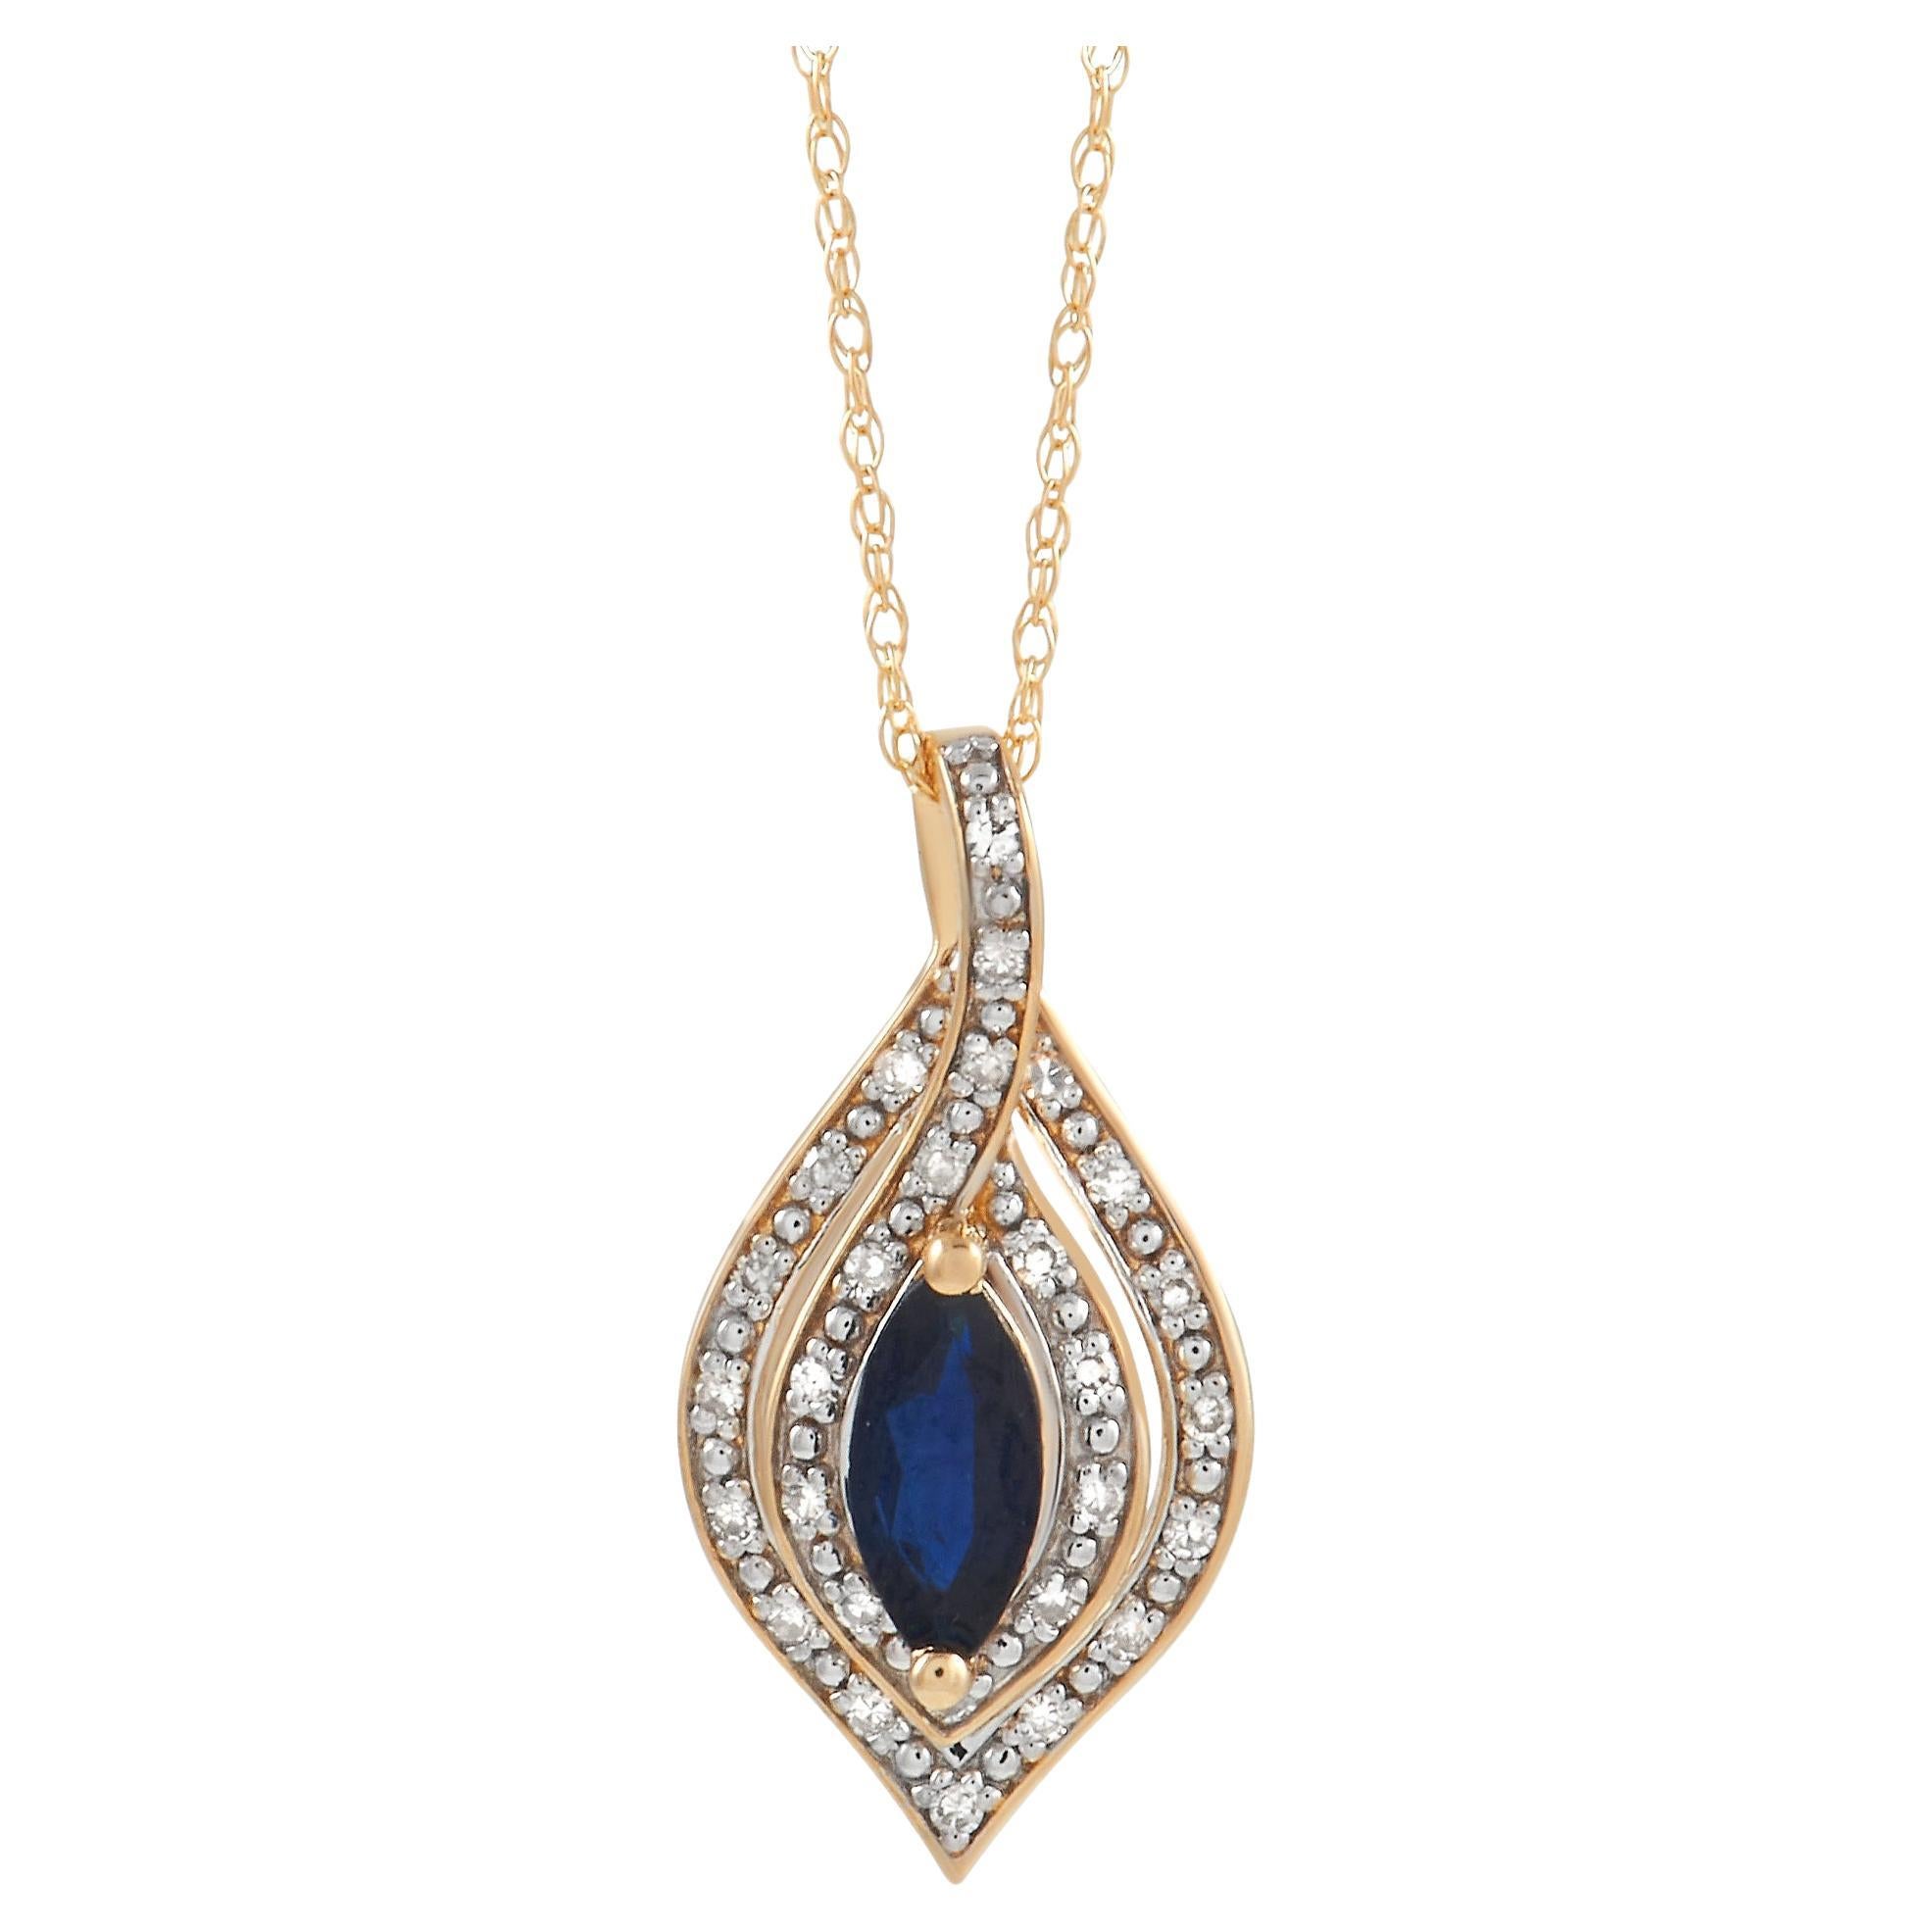 LB Exclusive 14K Yellow Gold 0.08ct Diamond and Sapphire Necklace